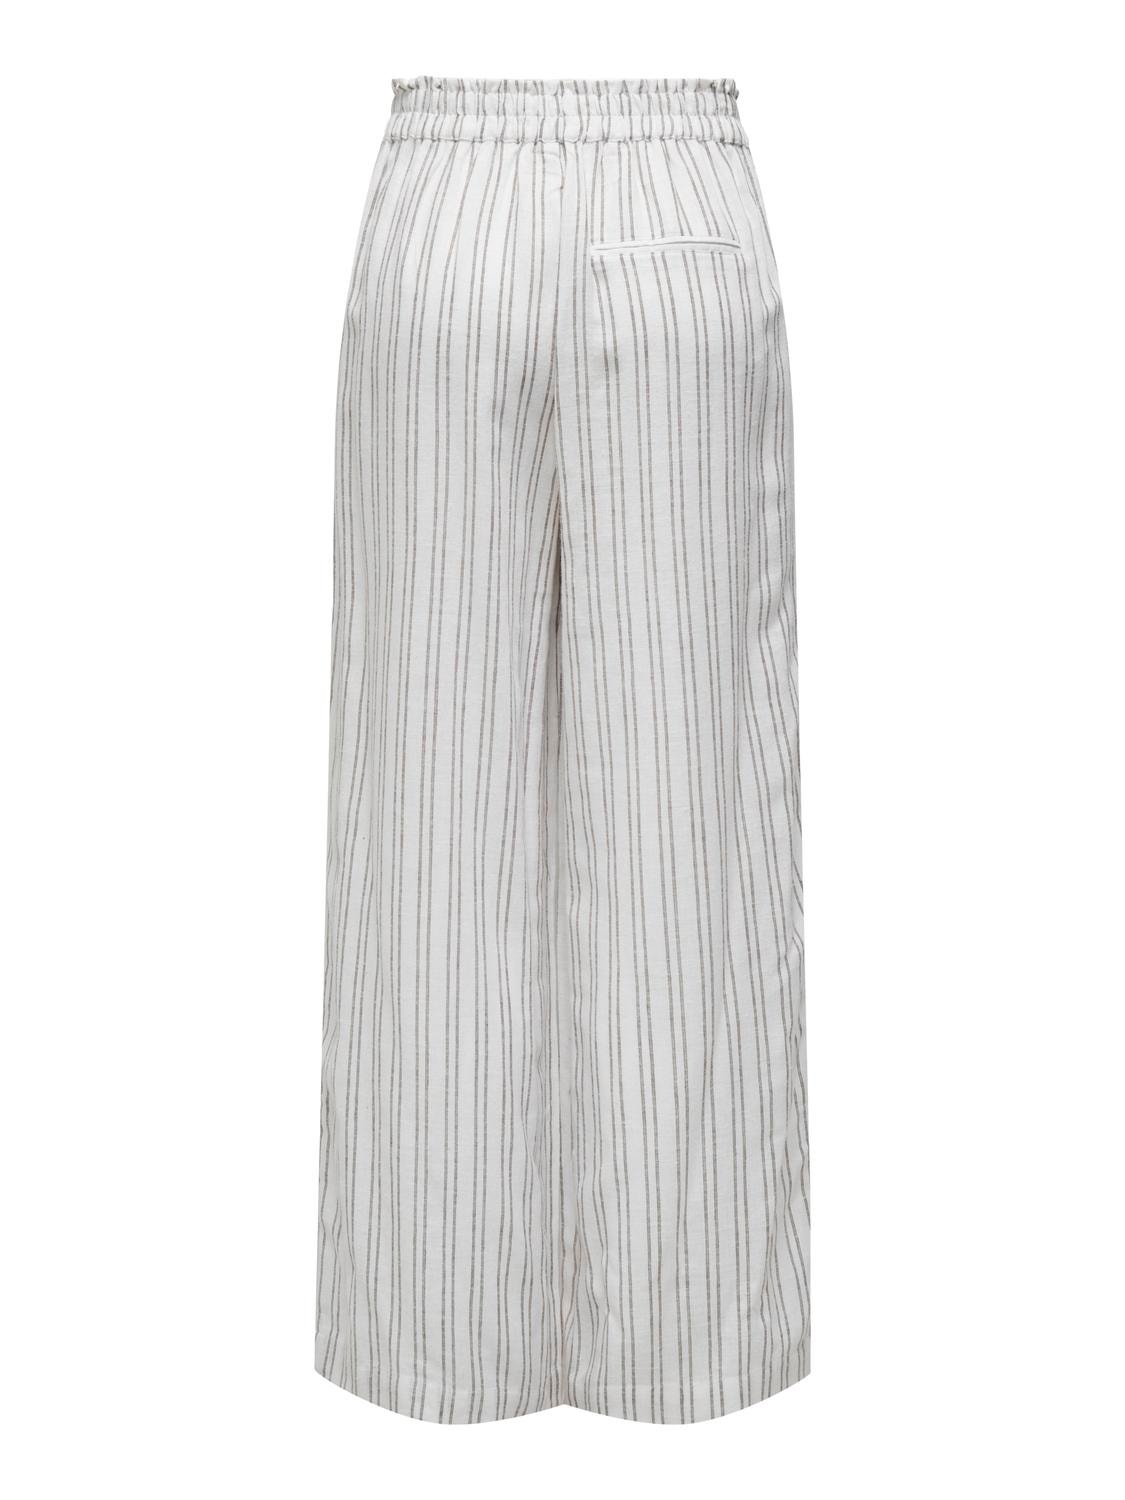 ONLY Linen pants with high waist -Bright White - 15315843